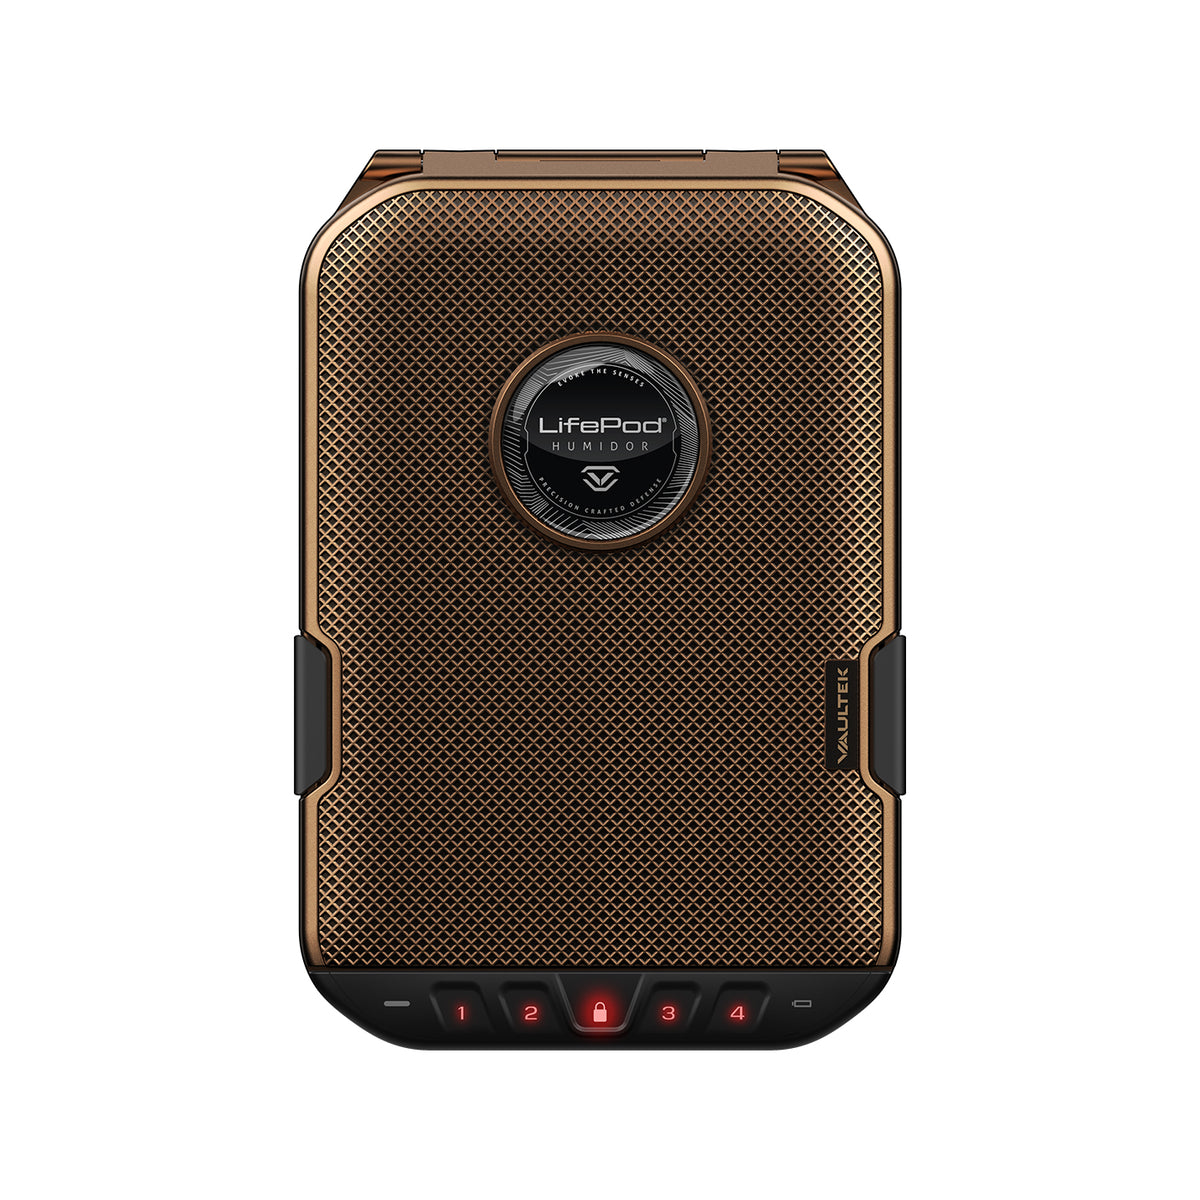 Vaultek - Weather Resistant LifePod Humidor with Built-in Lock System